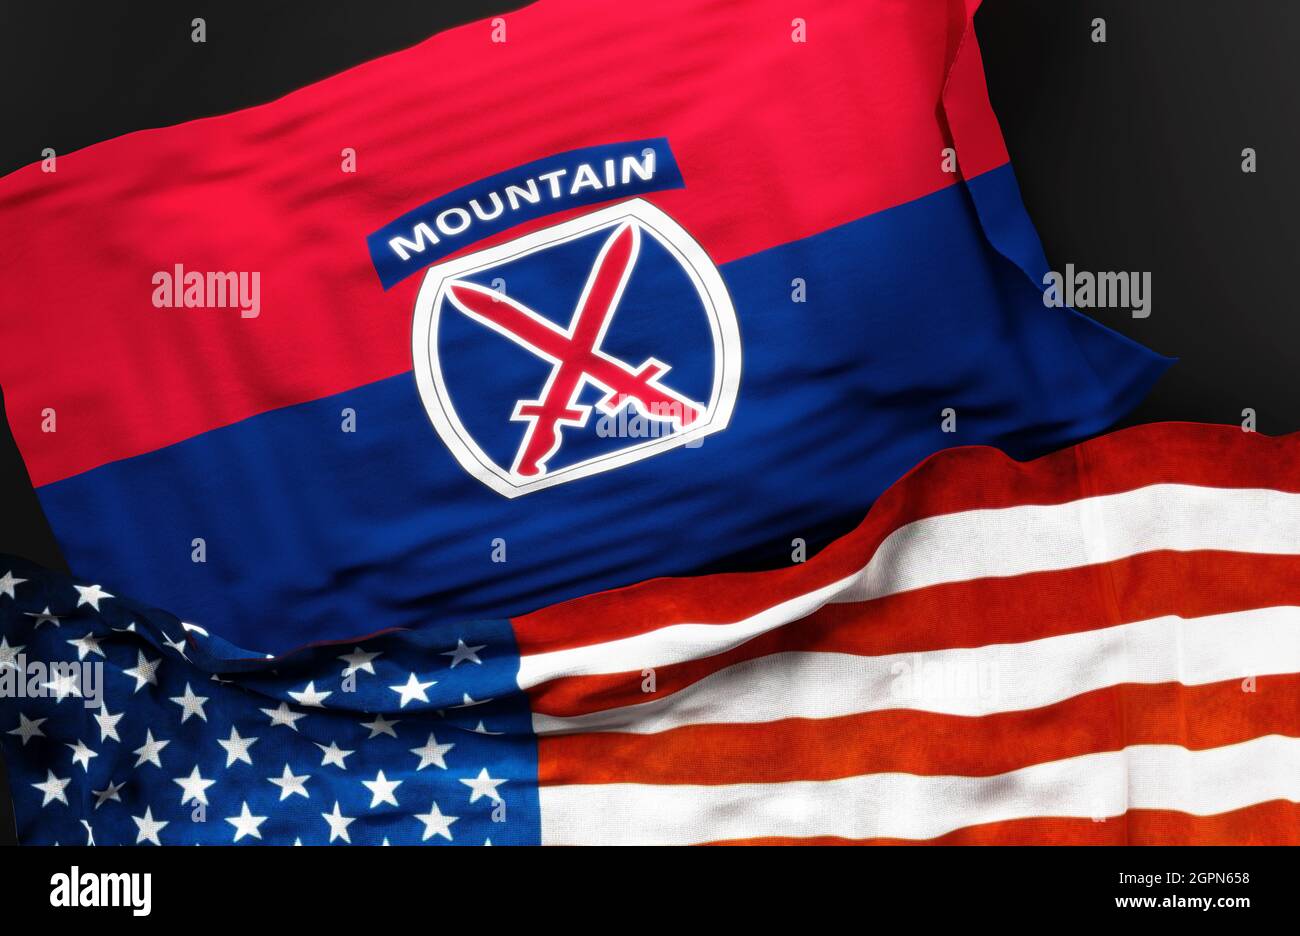 Flag of the United States Army 10th Mountain Division along with a flag of the United States of America as a symbol of a connection between them, 3d i Stock Photo